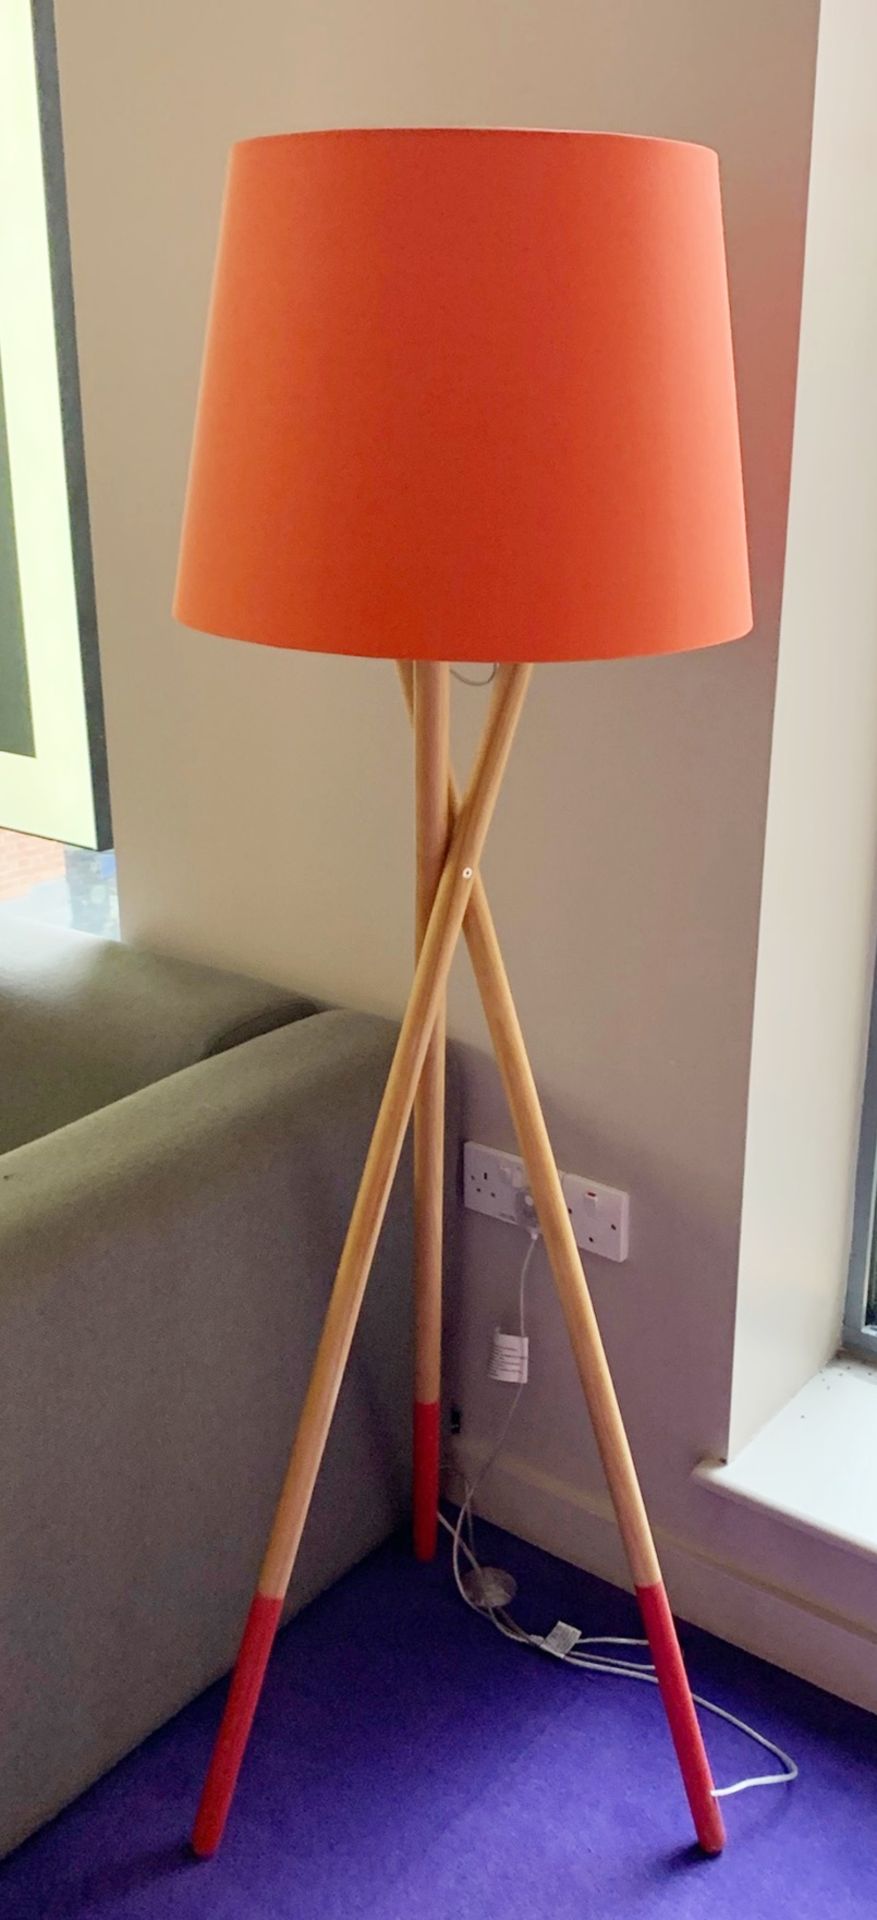 2 x Wooden Tripod Floor Lamps and White Ceramic Table Lamp - Each With Contemporary Orange - Image 2 of 3